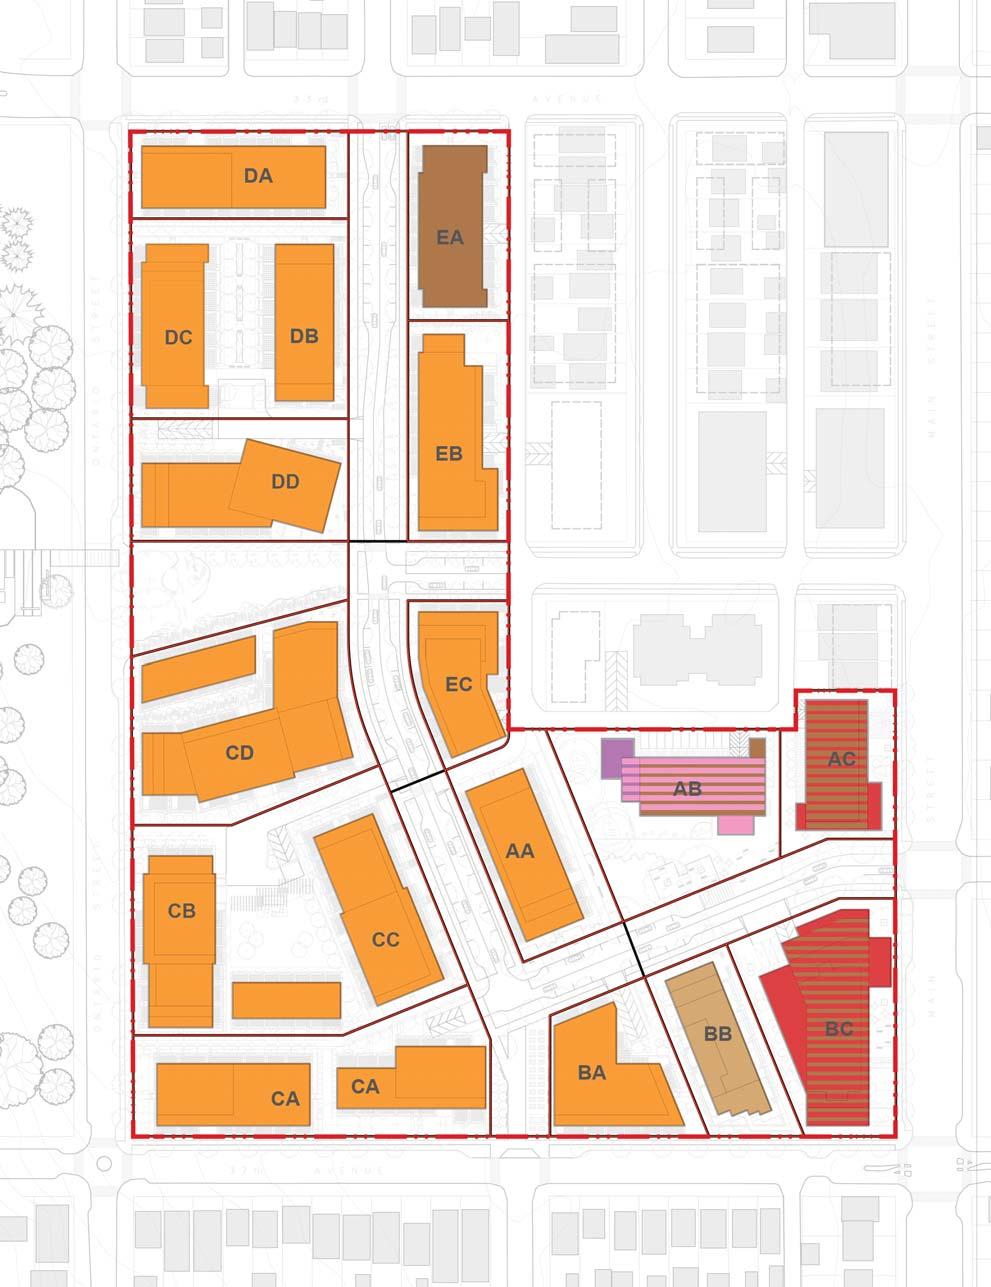 2.4.4 Land Use, Buildings, and Heights Figure 2-13: Land Use Plan At ground floor the plan has the most variety of uses, ensuring the activation of the public realm.